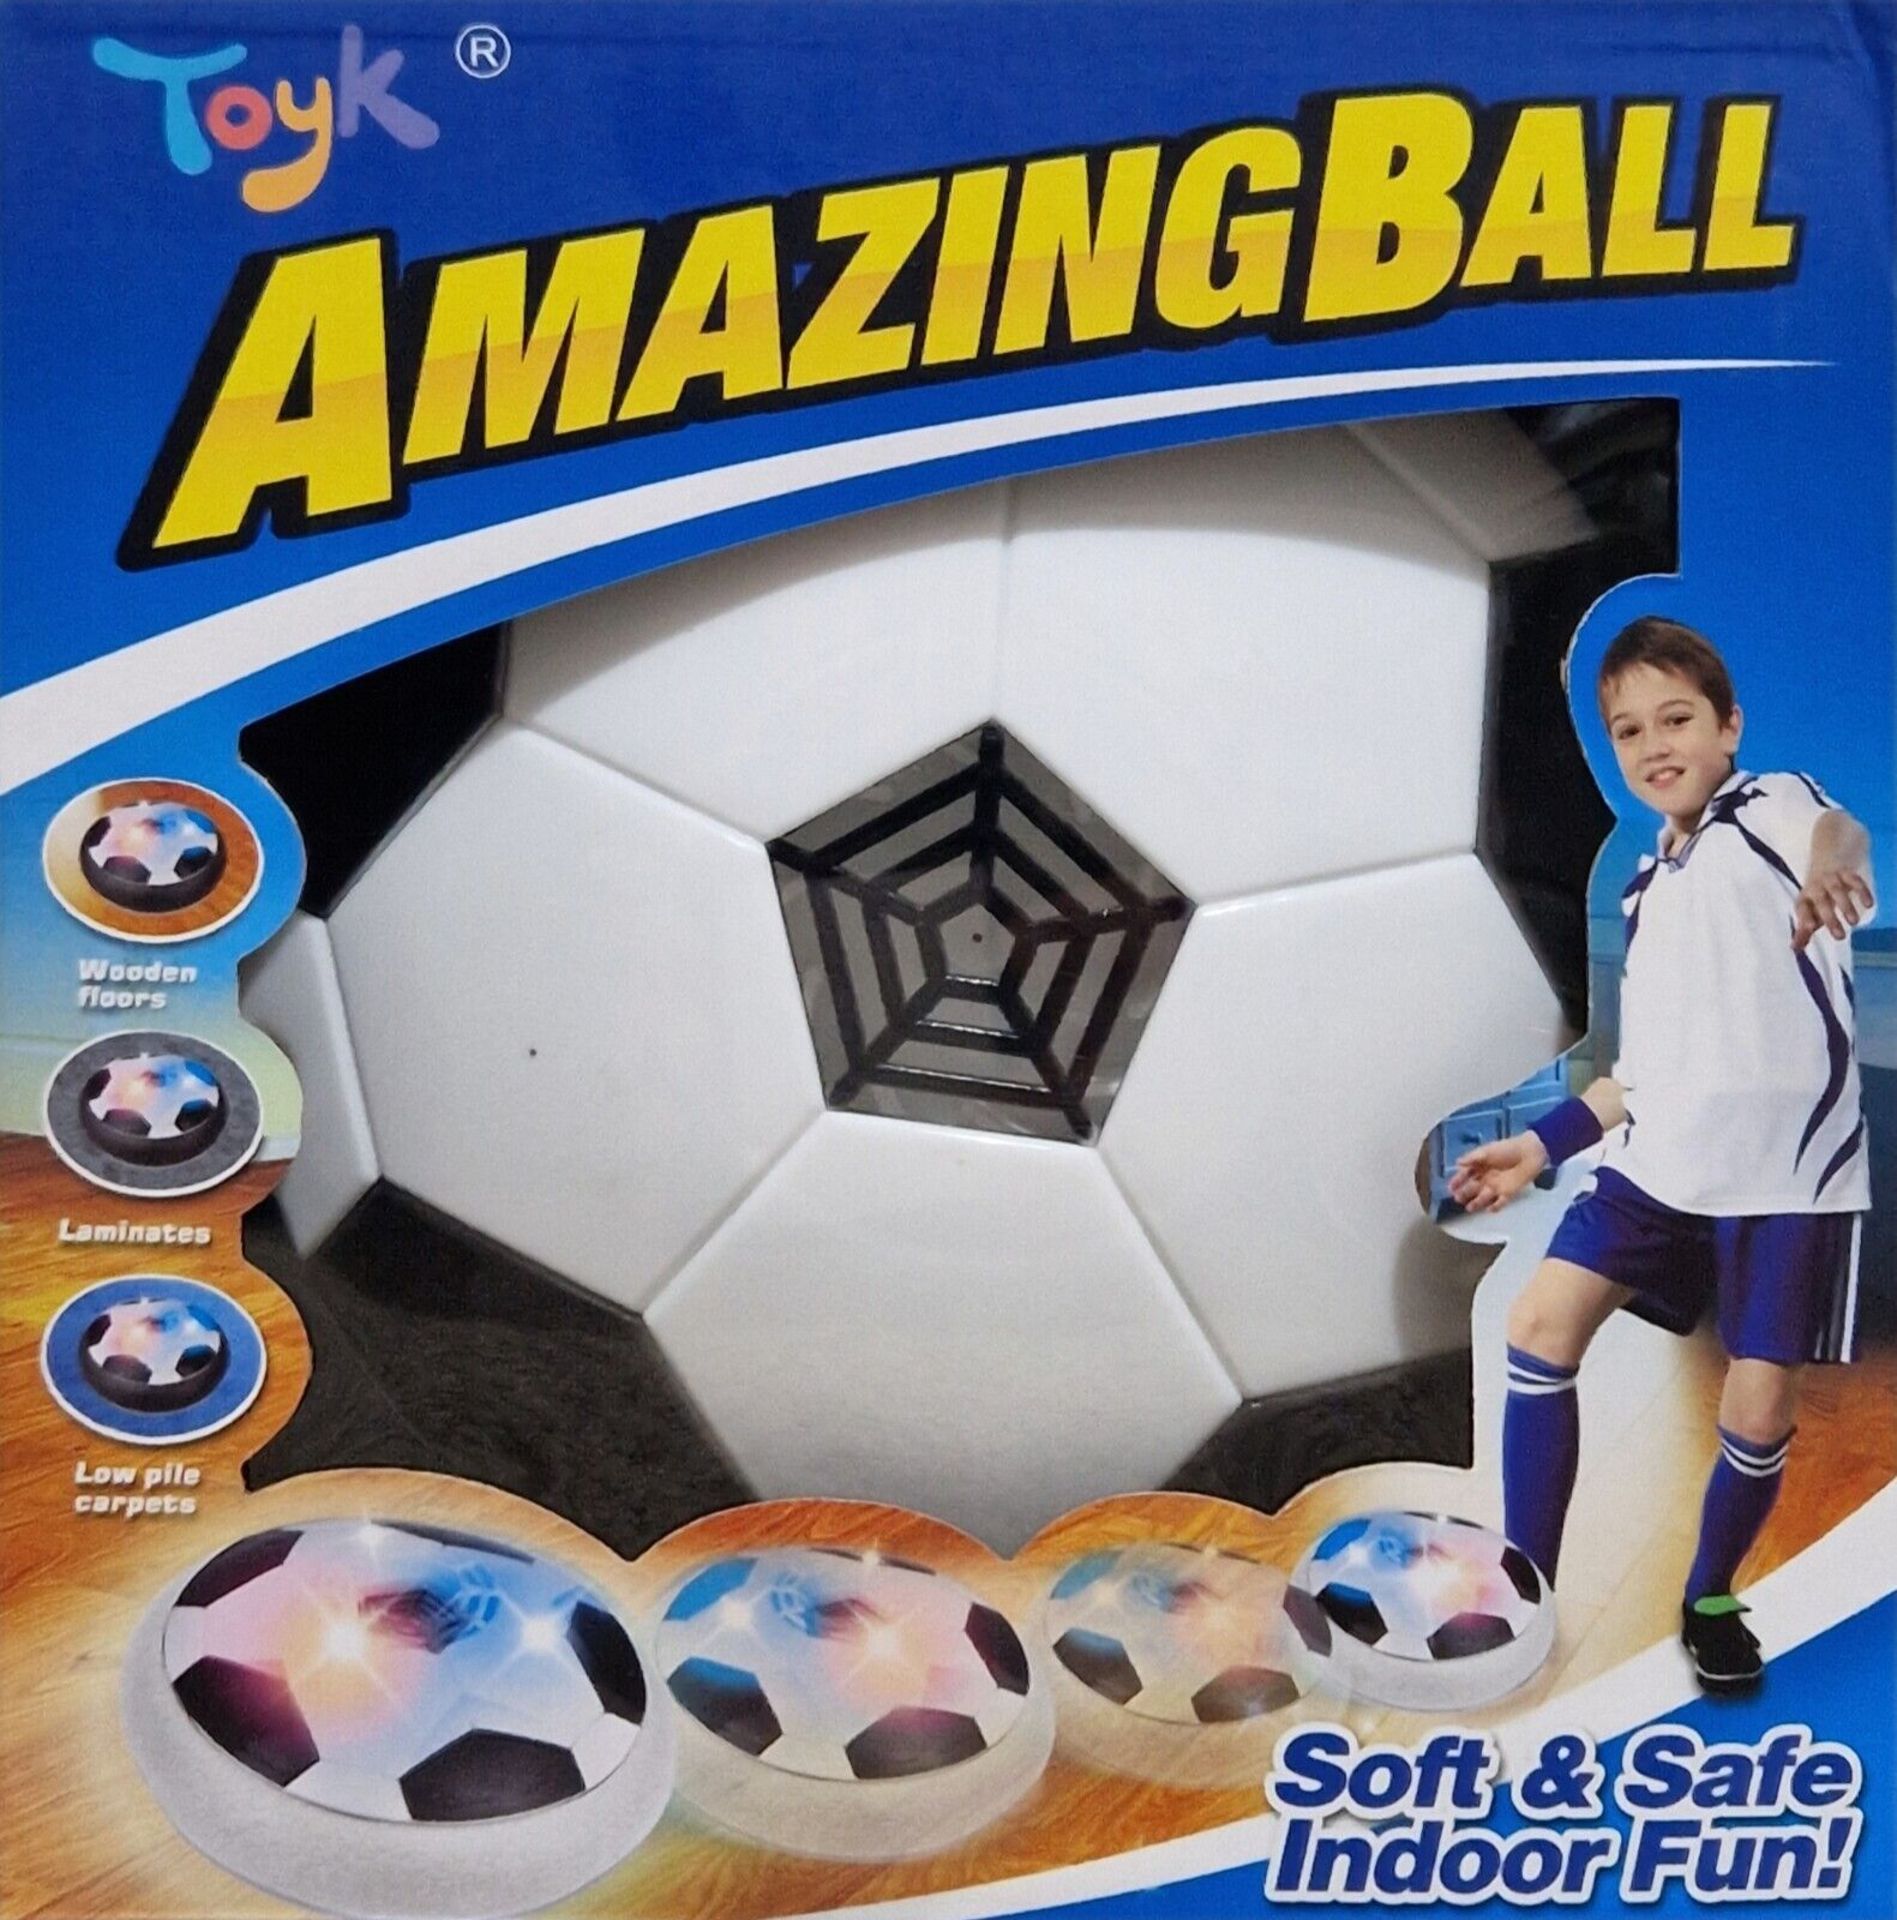 100 X NEW AMAZING BALL HOVER BALL FOOTBALL - RRP £3000